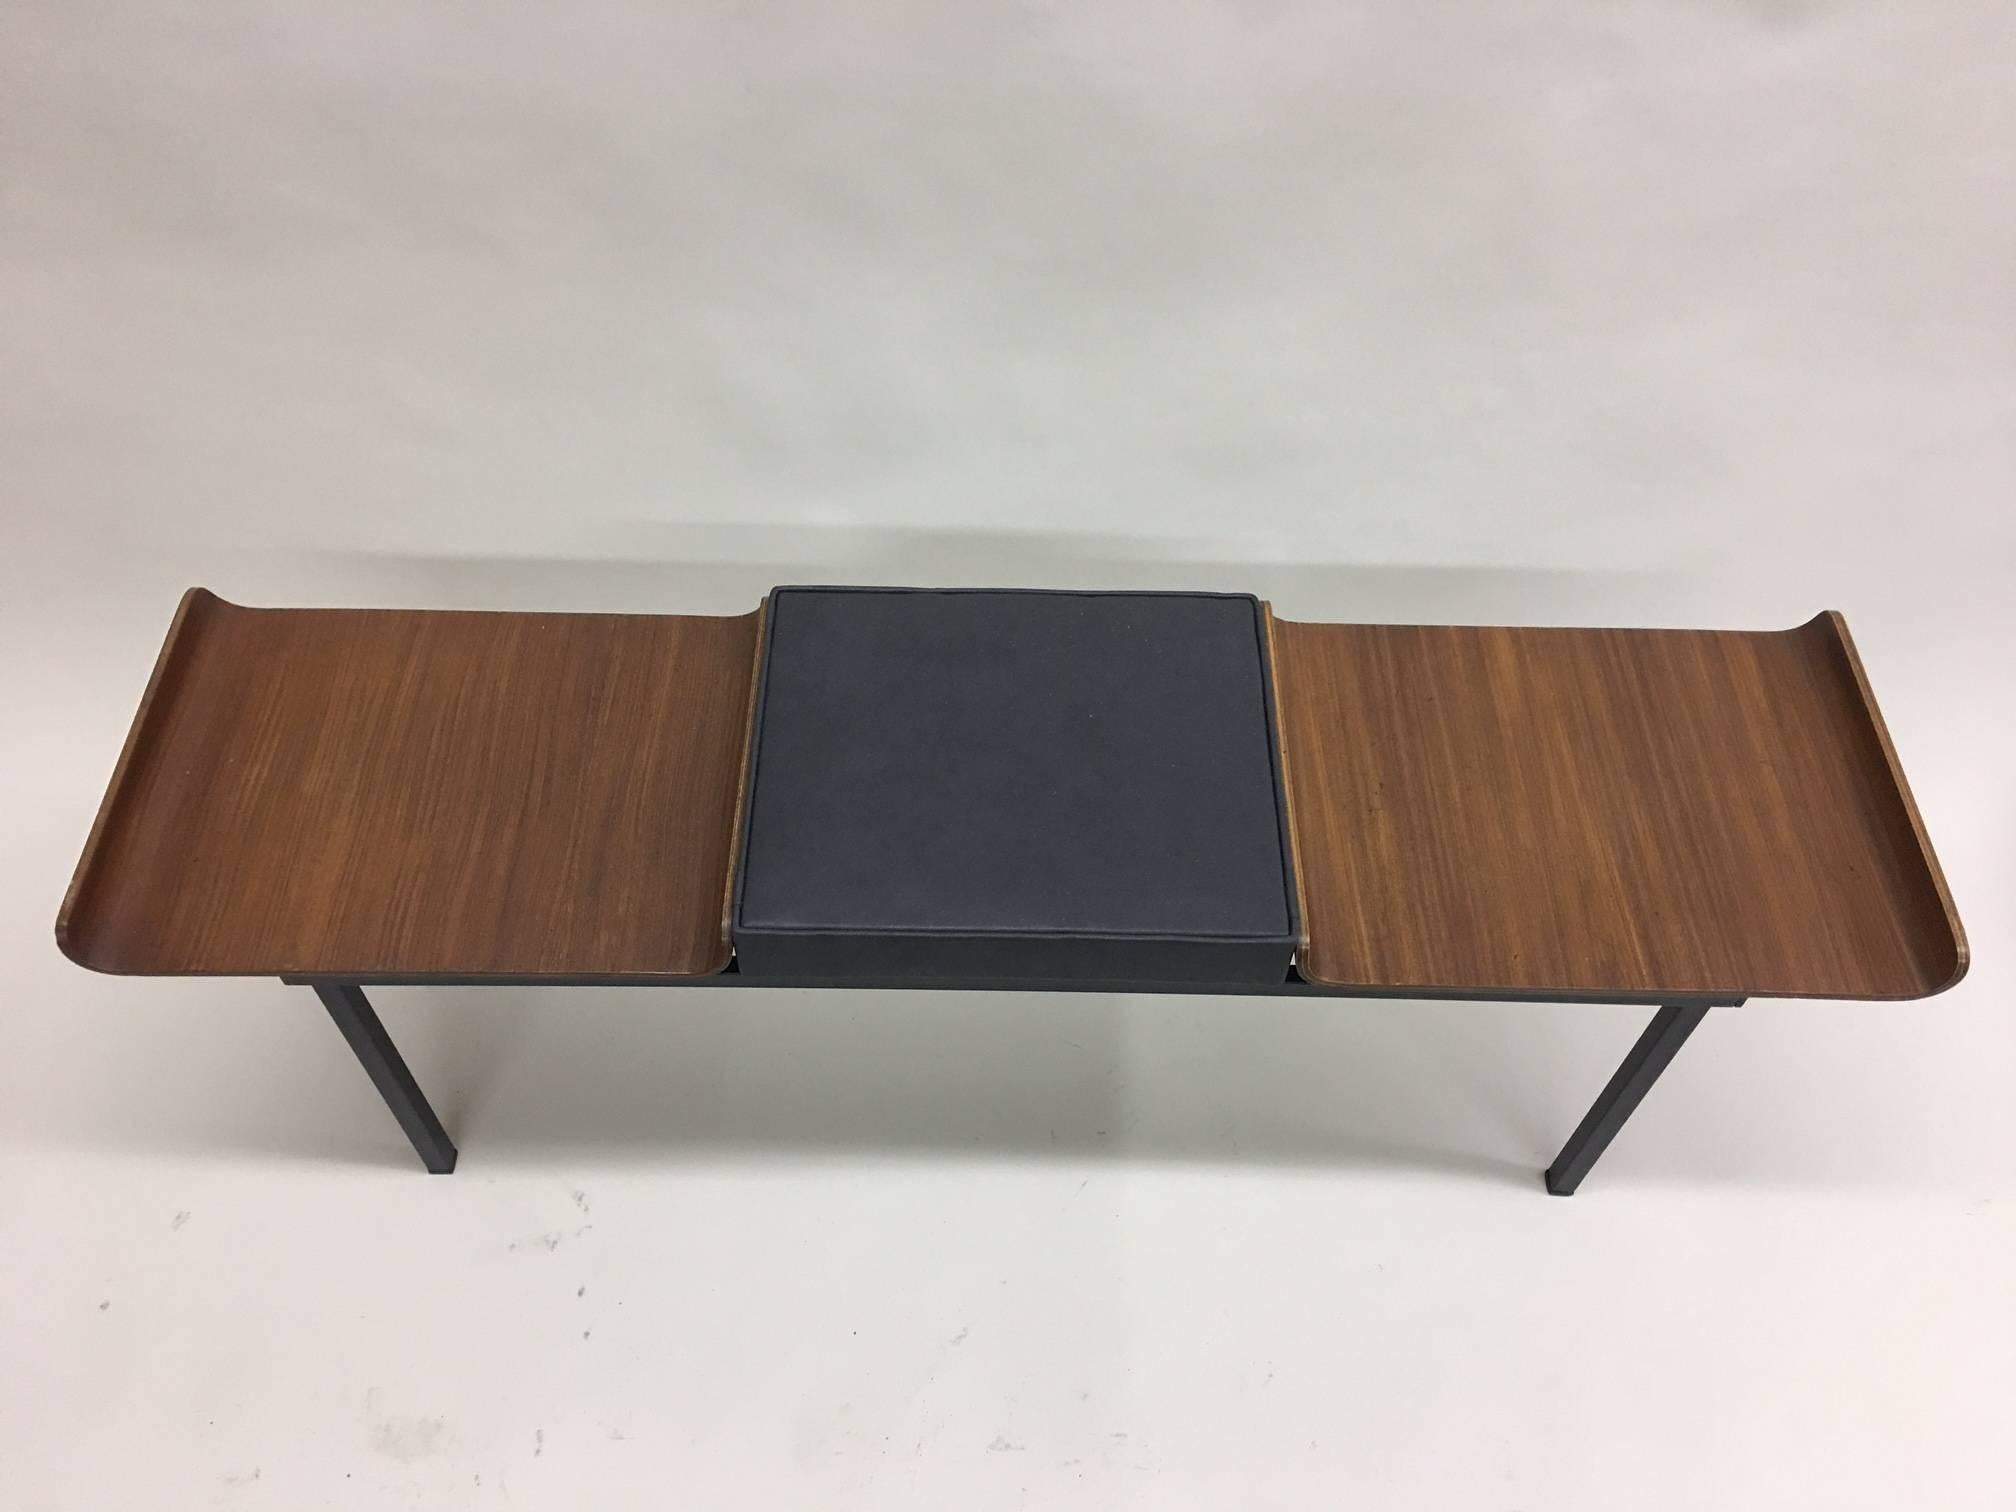 Italian Mid-Century Modern / Minimalist Bench by Franco Campo and Carlo Graffi In Good Condition For Sale In New York, NY